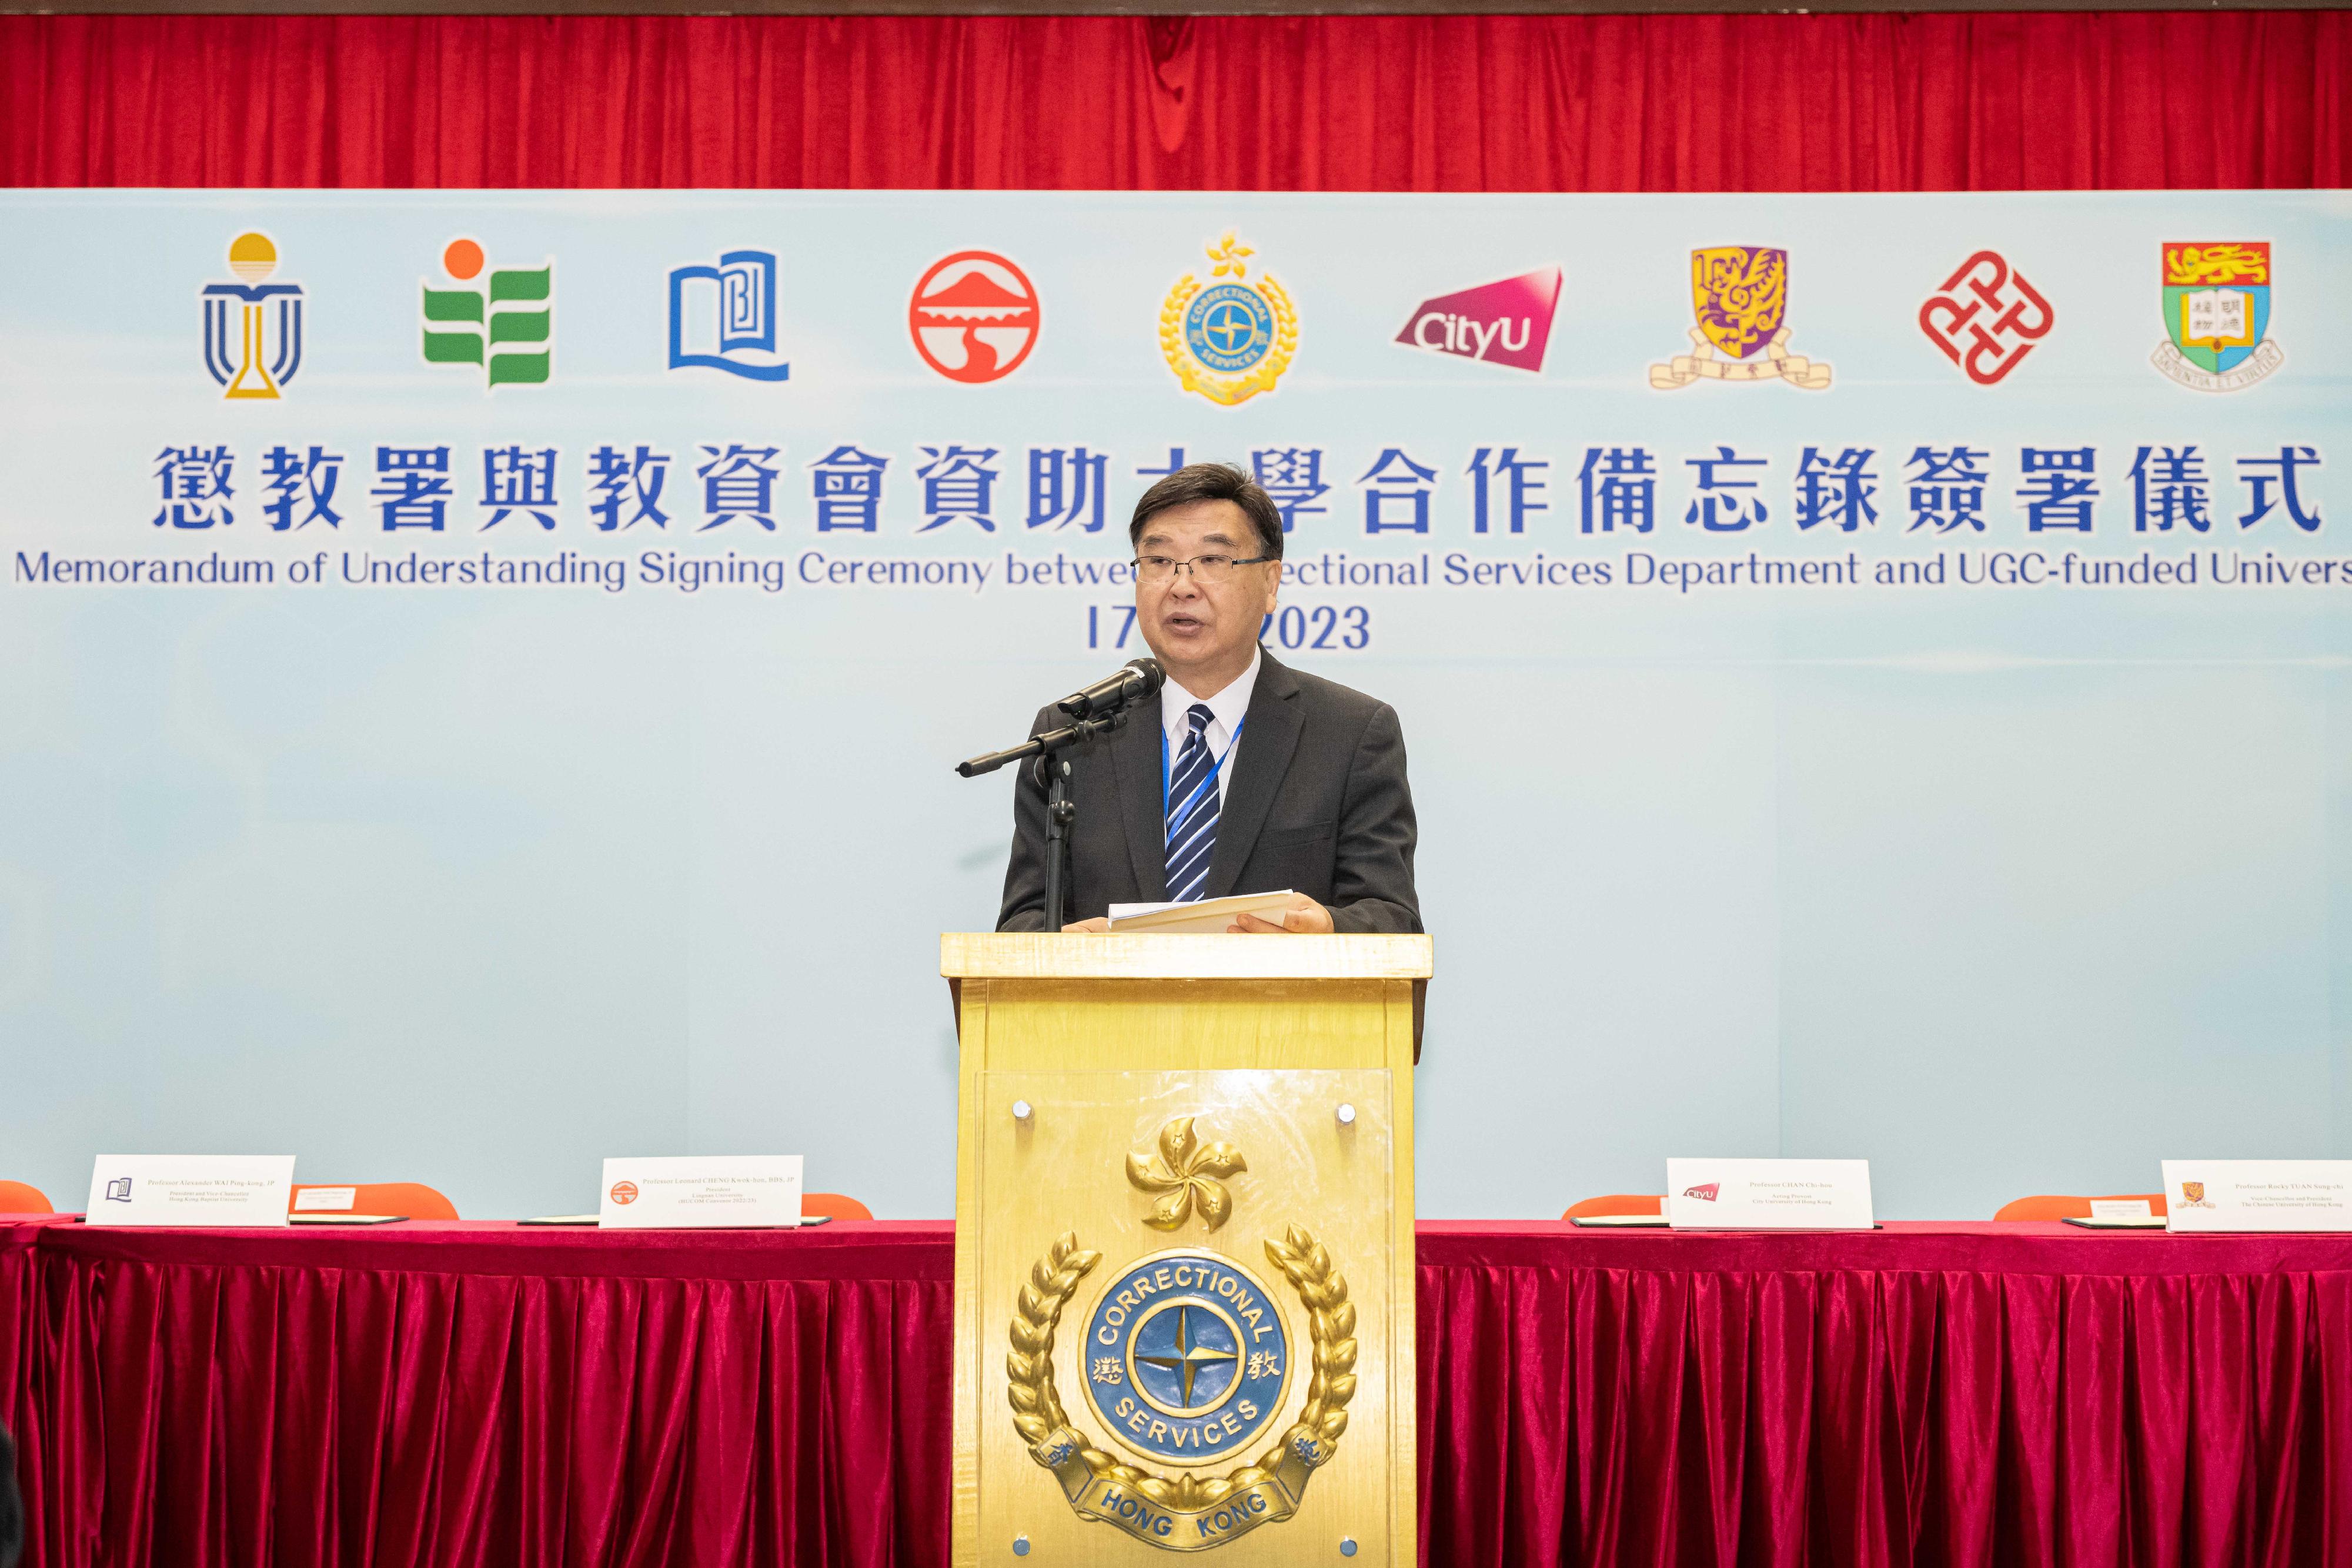 The Correctional Services Department and eight University Grants Committee-funded universities signed a Memorandum of Understanding today (April 17) to facilitate the continuous education of persons in custody who were students of the universities before imprisonment and wish to continue their studies. Photo shows the Chairman of the Research Grants Council, Professor Wong Yuk-shan, delivering a speech at the signing ceremony.